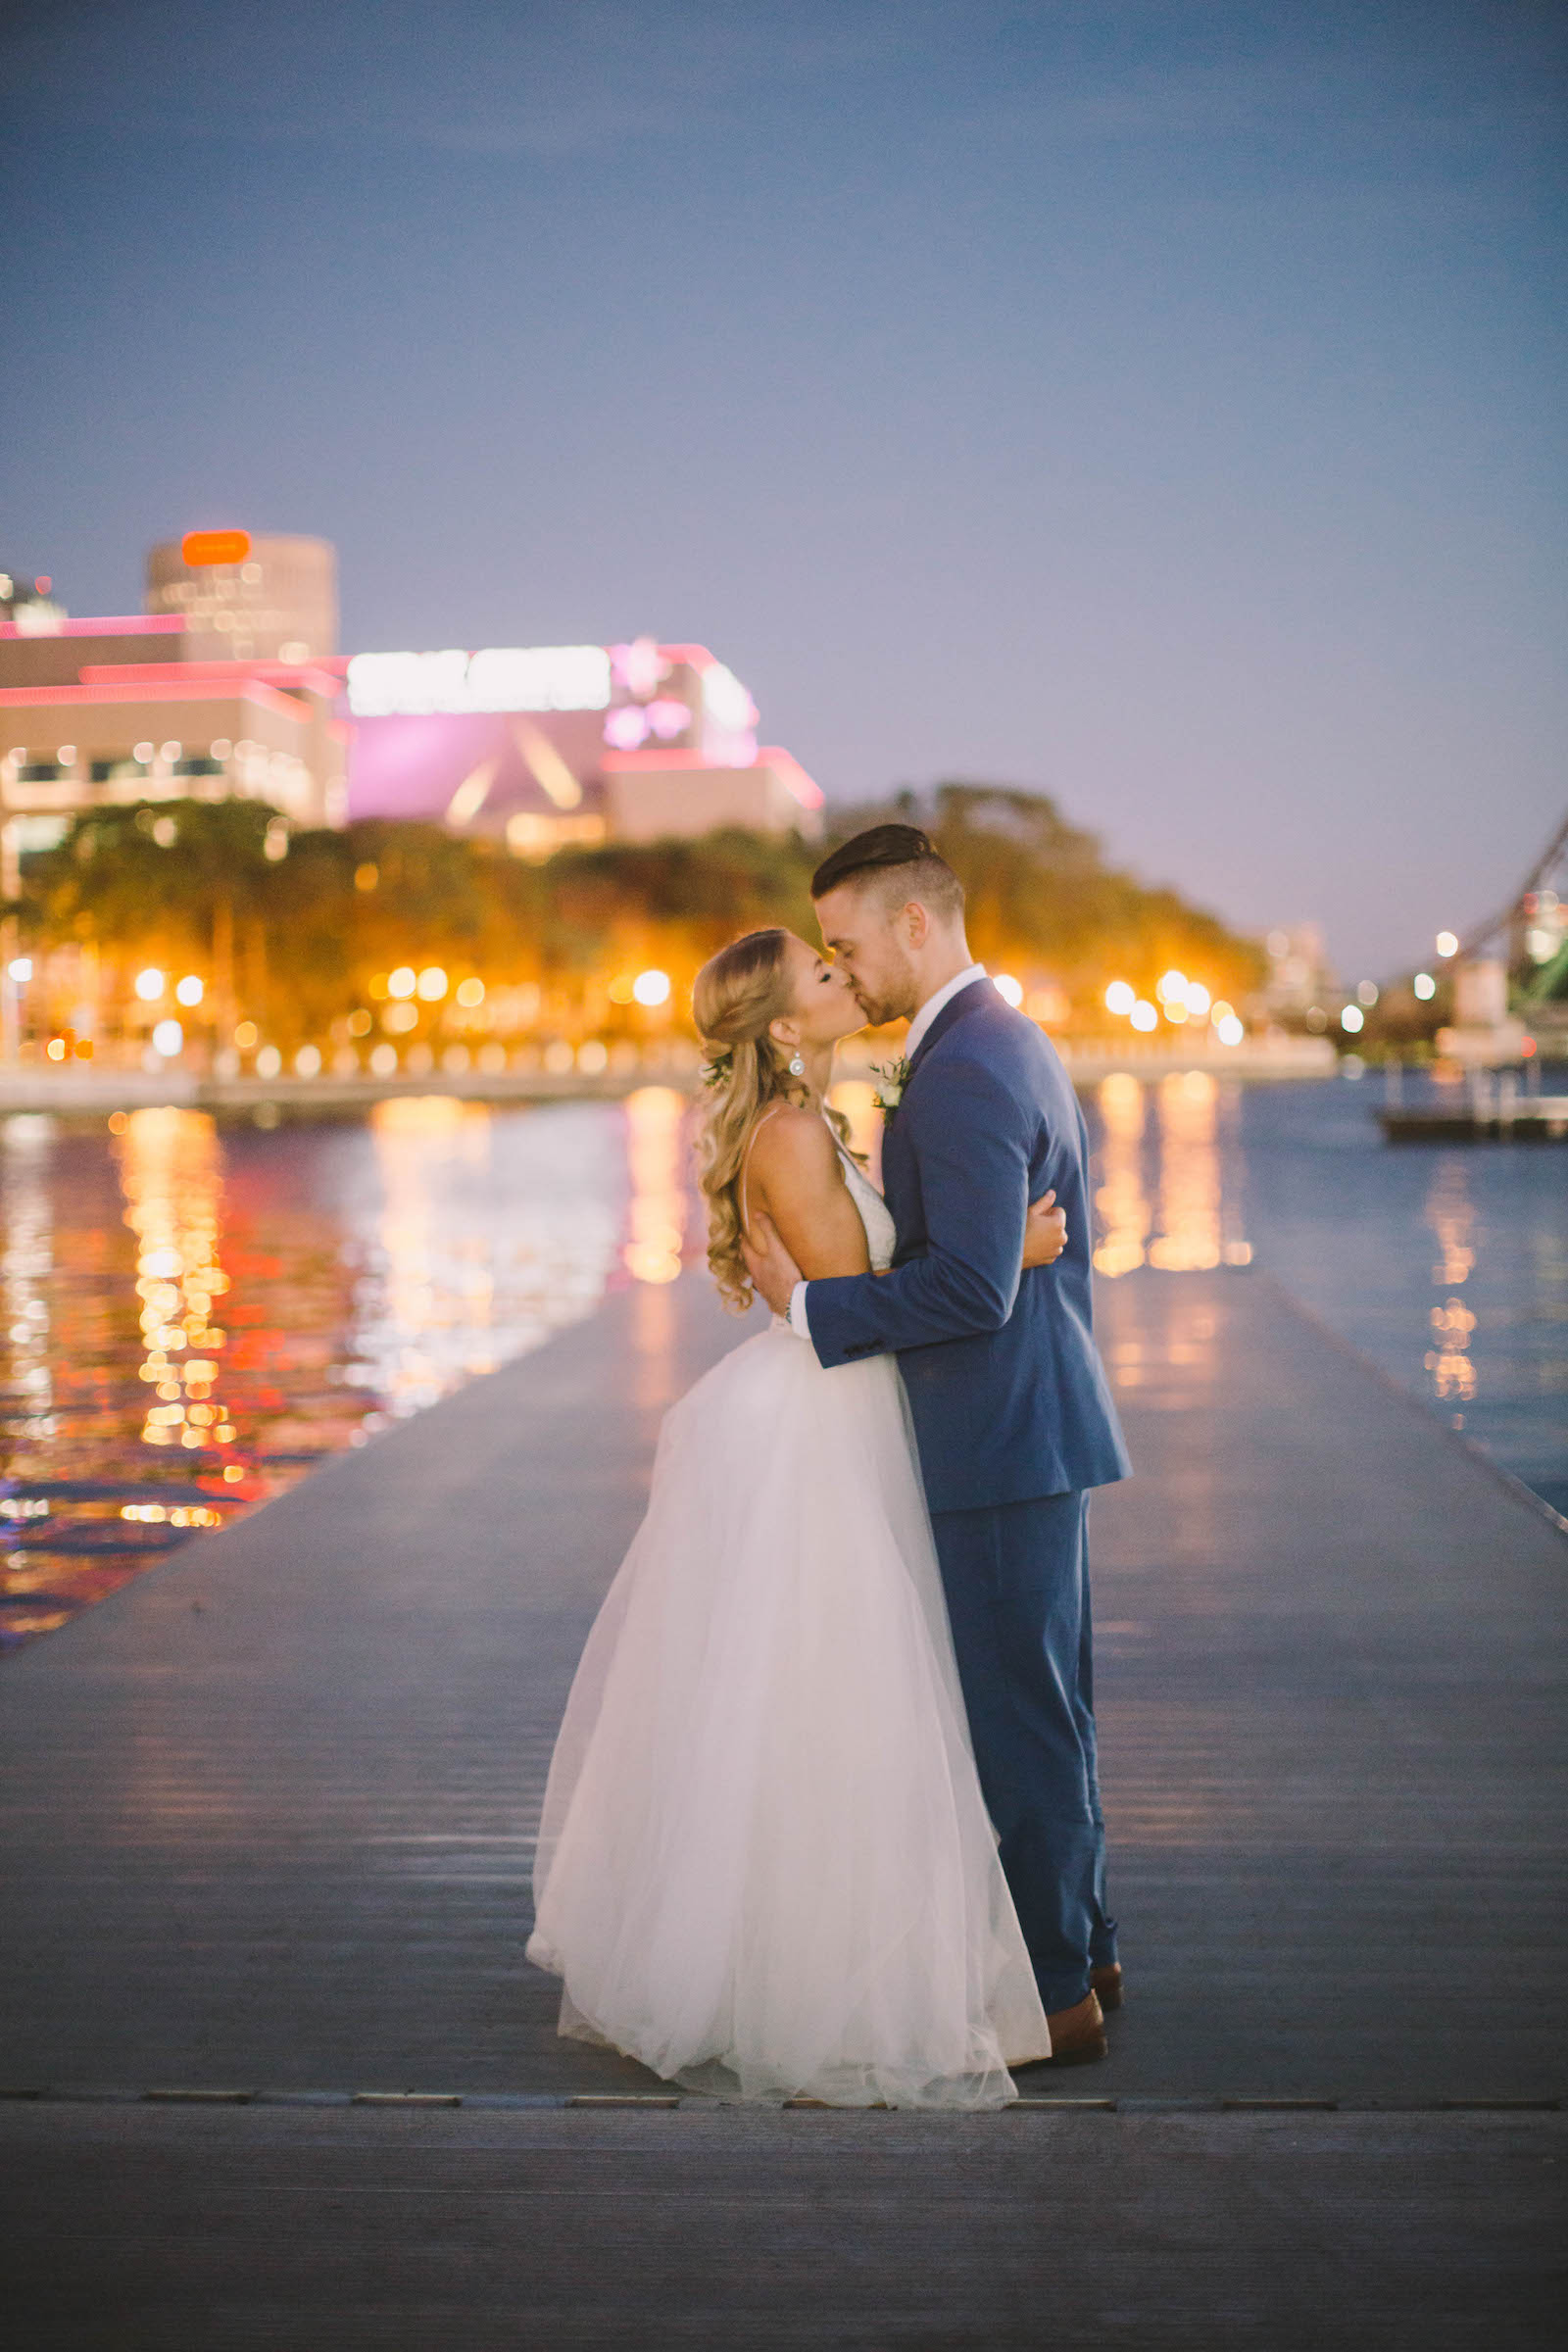 Tampa Waterfront City Lights Bride and Groom Wedding Portrait on Boat Dock